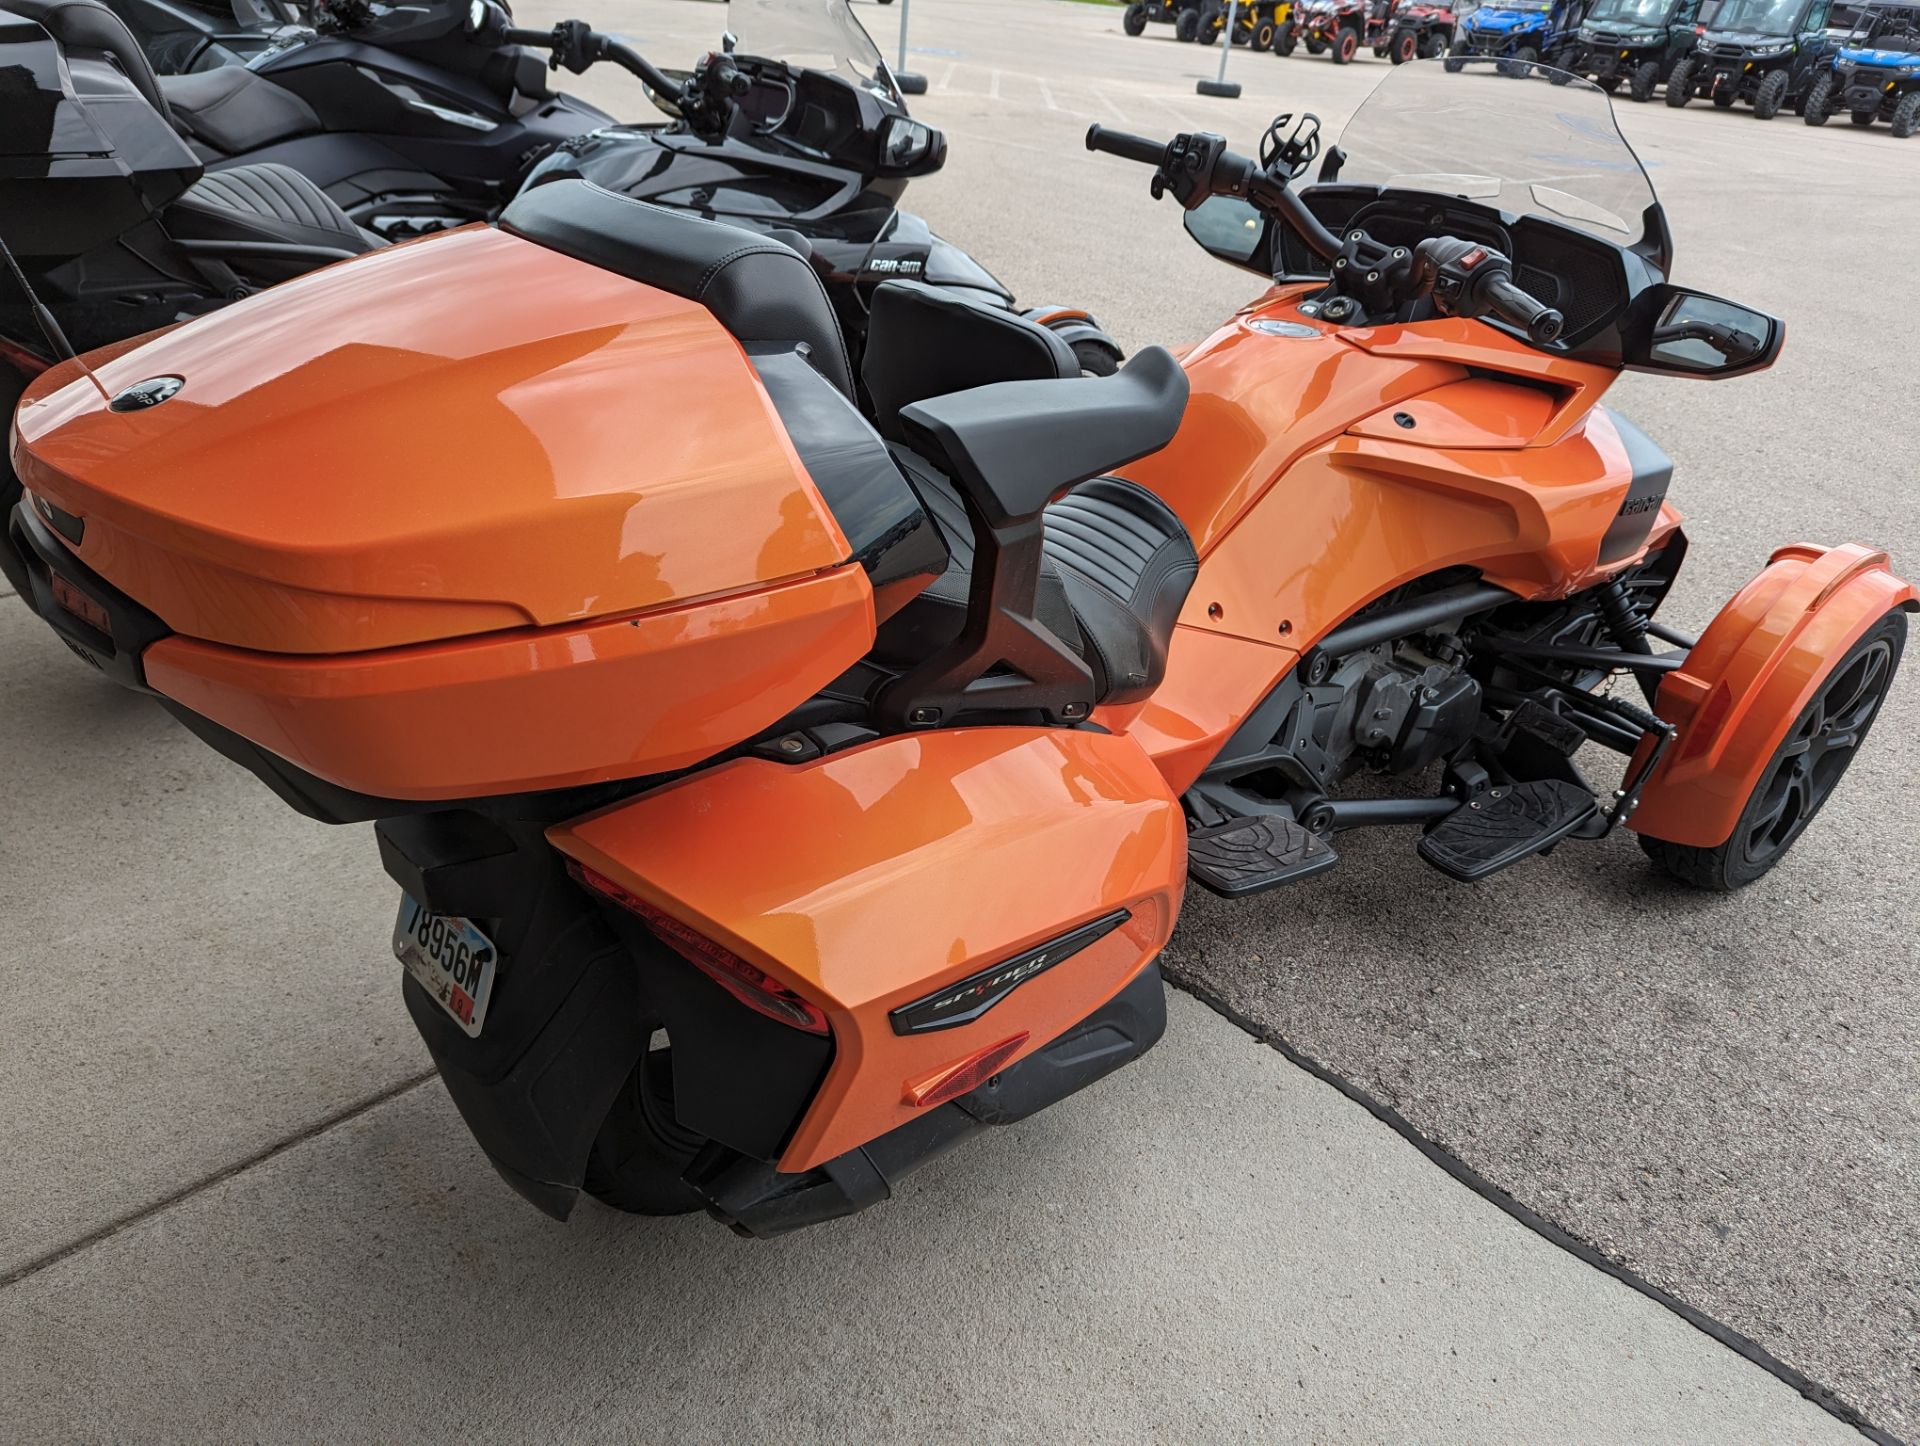 2019 Can-Am Spyder F3 Limited in Rapid City, South Dakota - Photo 7